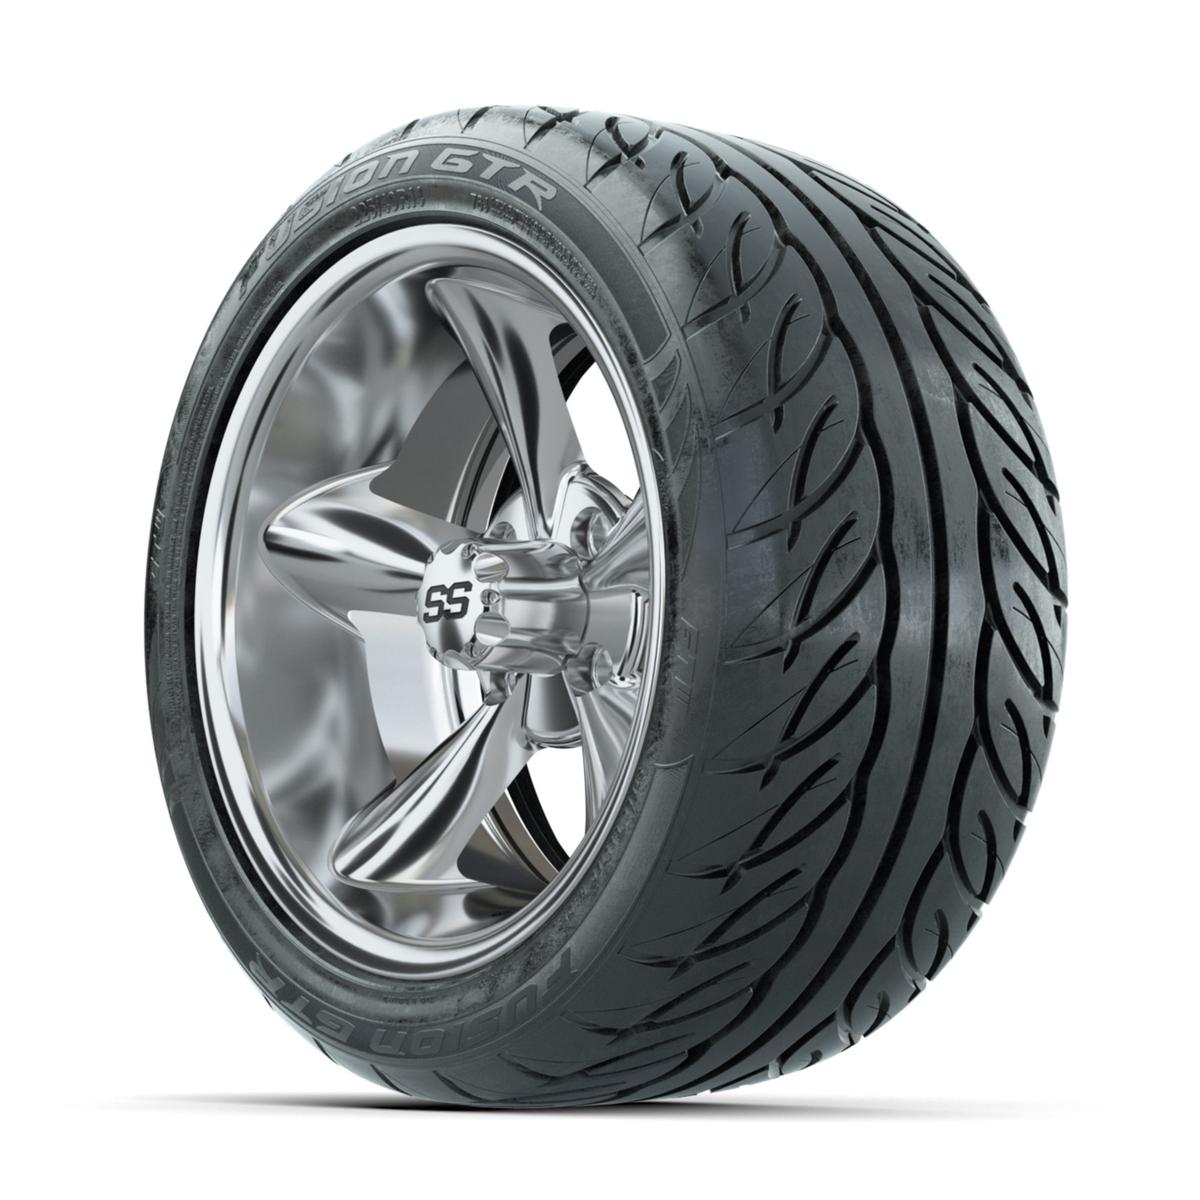 GTW Godfather Chrome 14 in Wheels with 225/40-R14 Fusion GTR Street Tires – Full Set